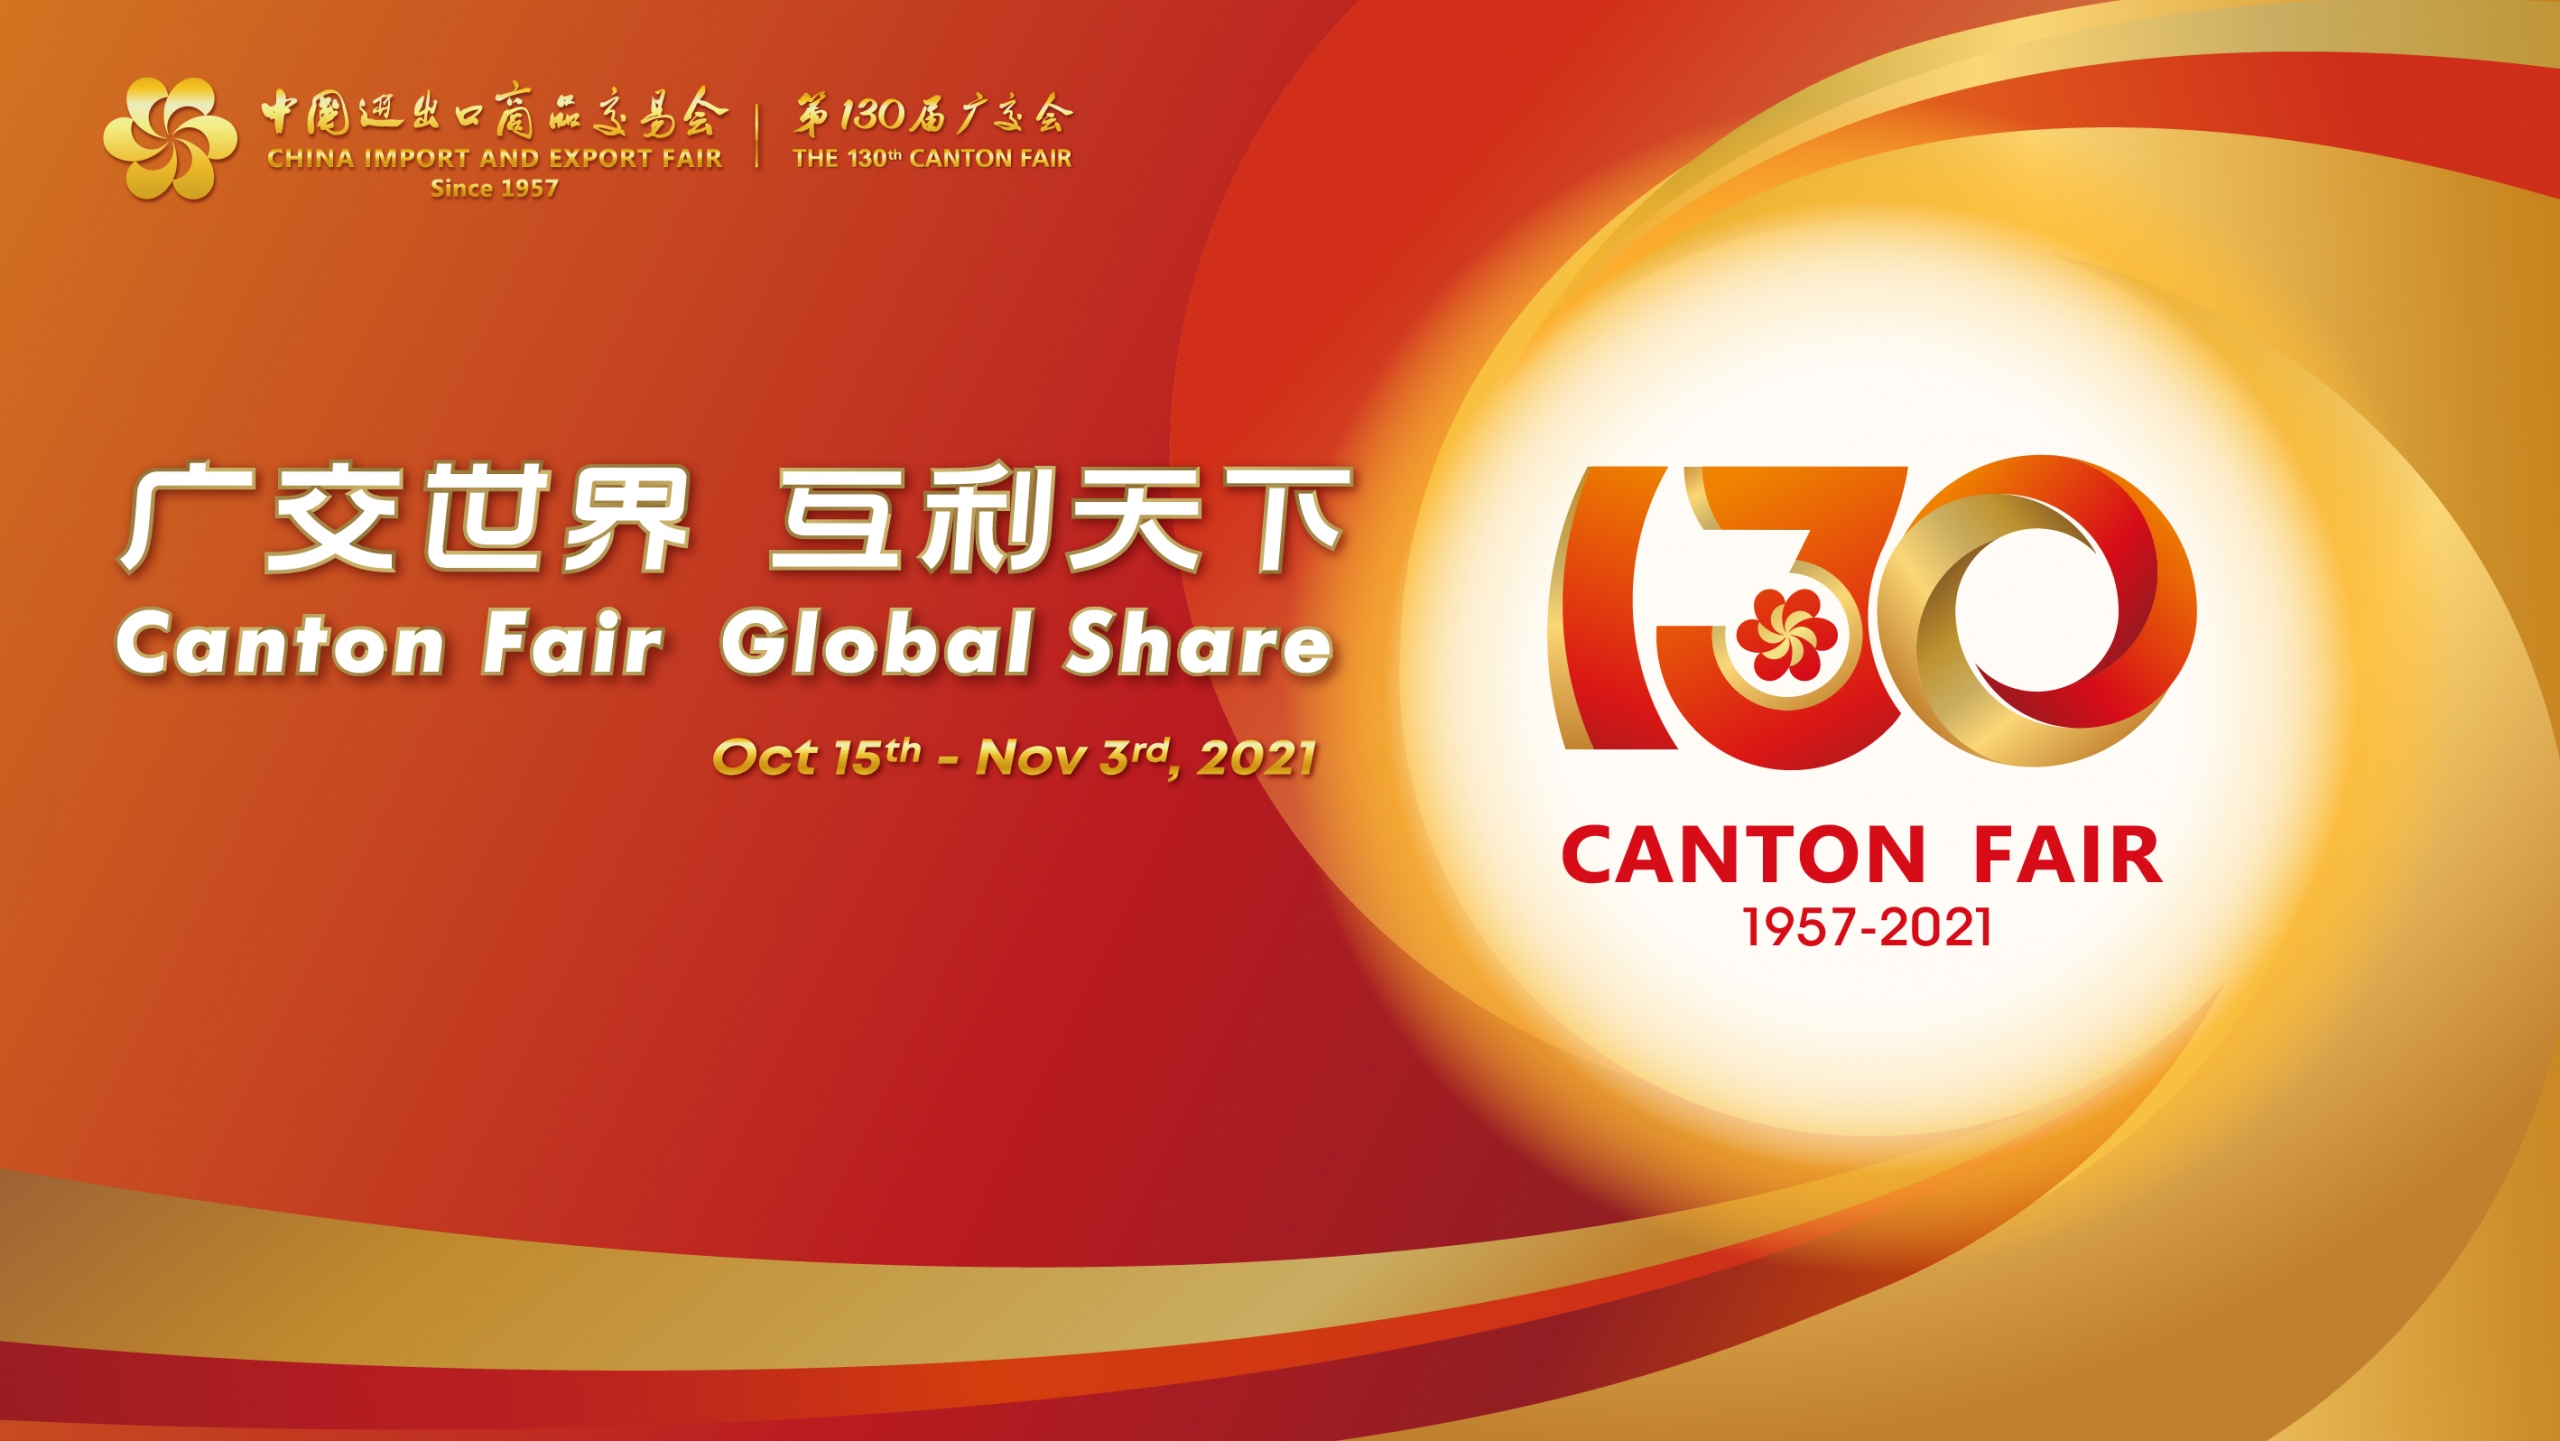 Overview of China Import and Export Fair (Canton Fair) Tone